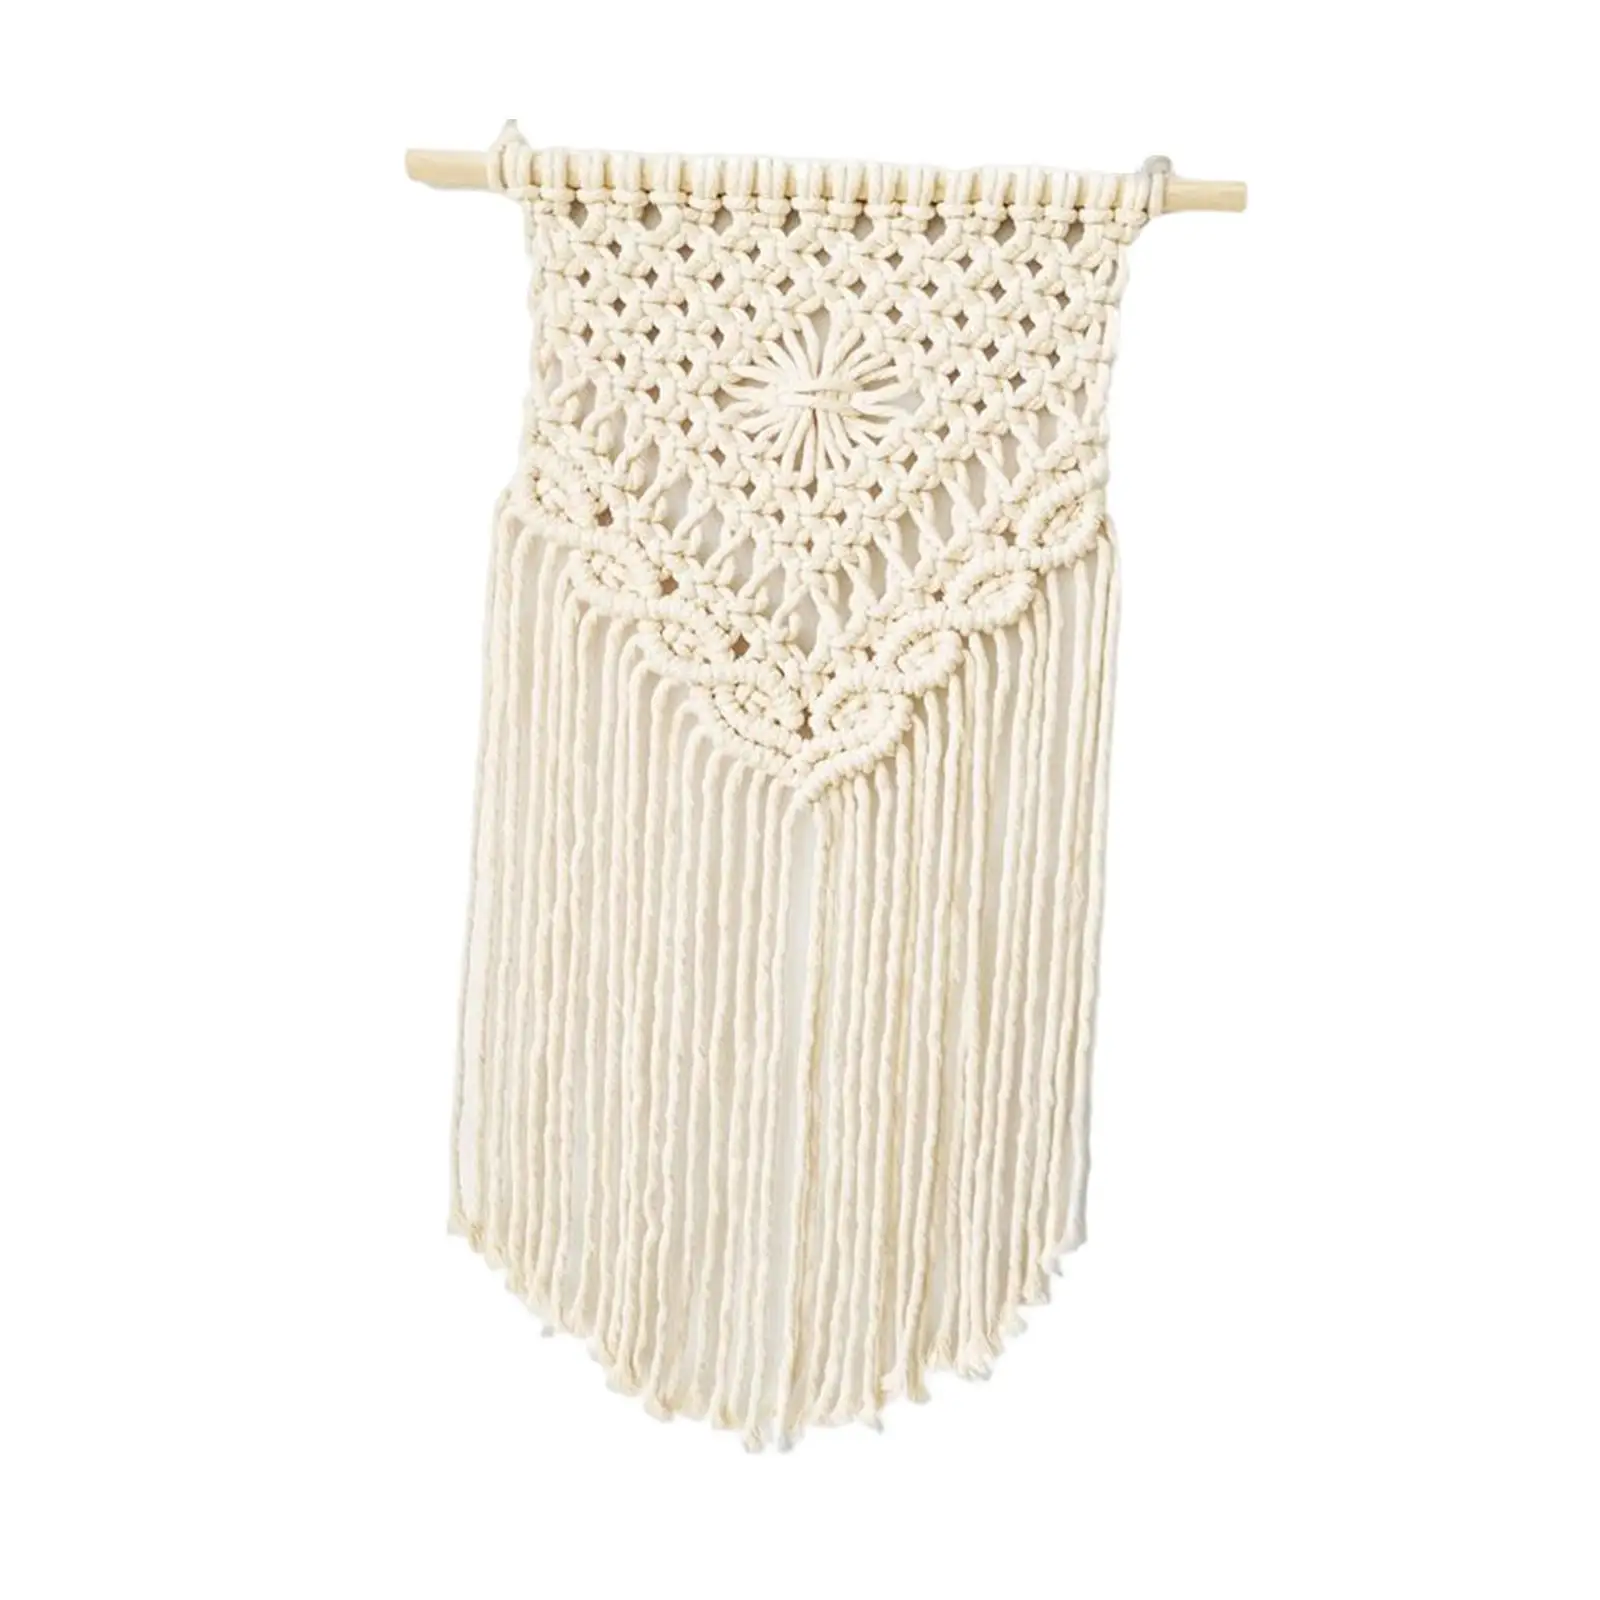 Macrame Wall Hanging Tapestry Boho 35x60cm White Color for Apartment Room Wall Art